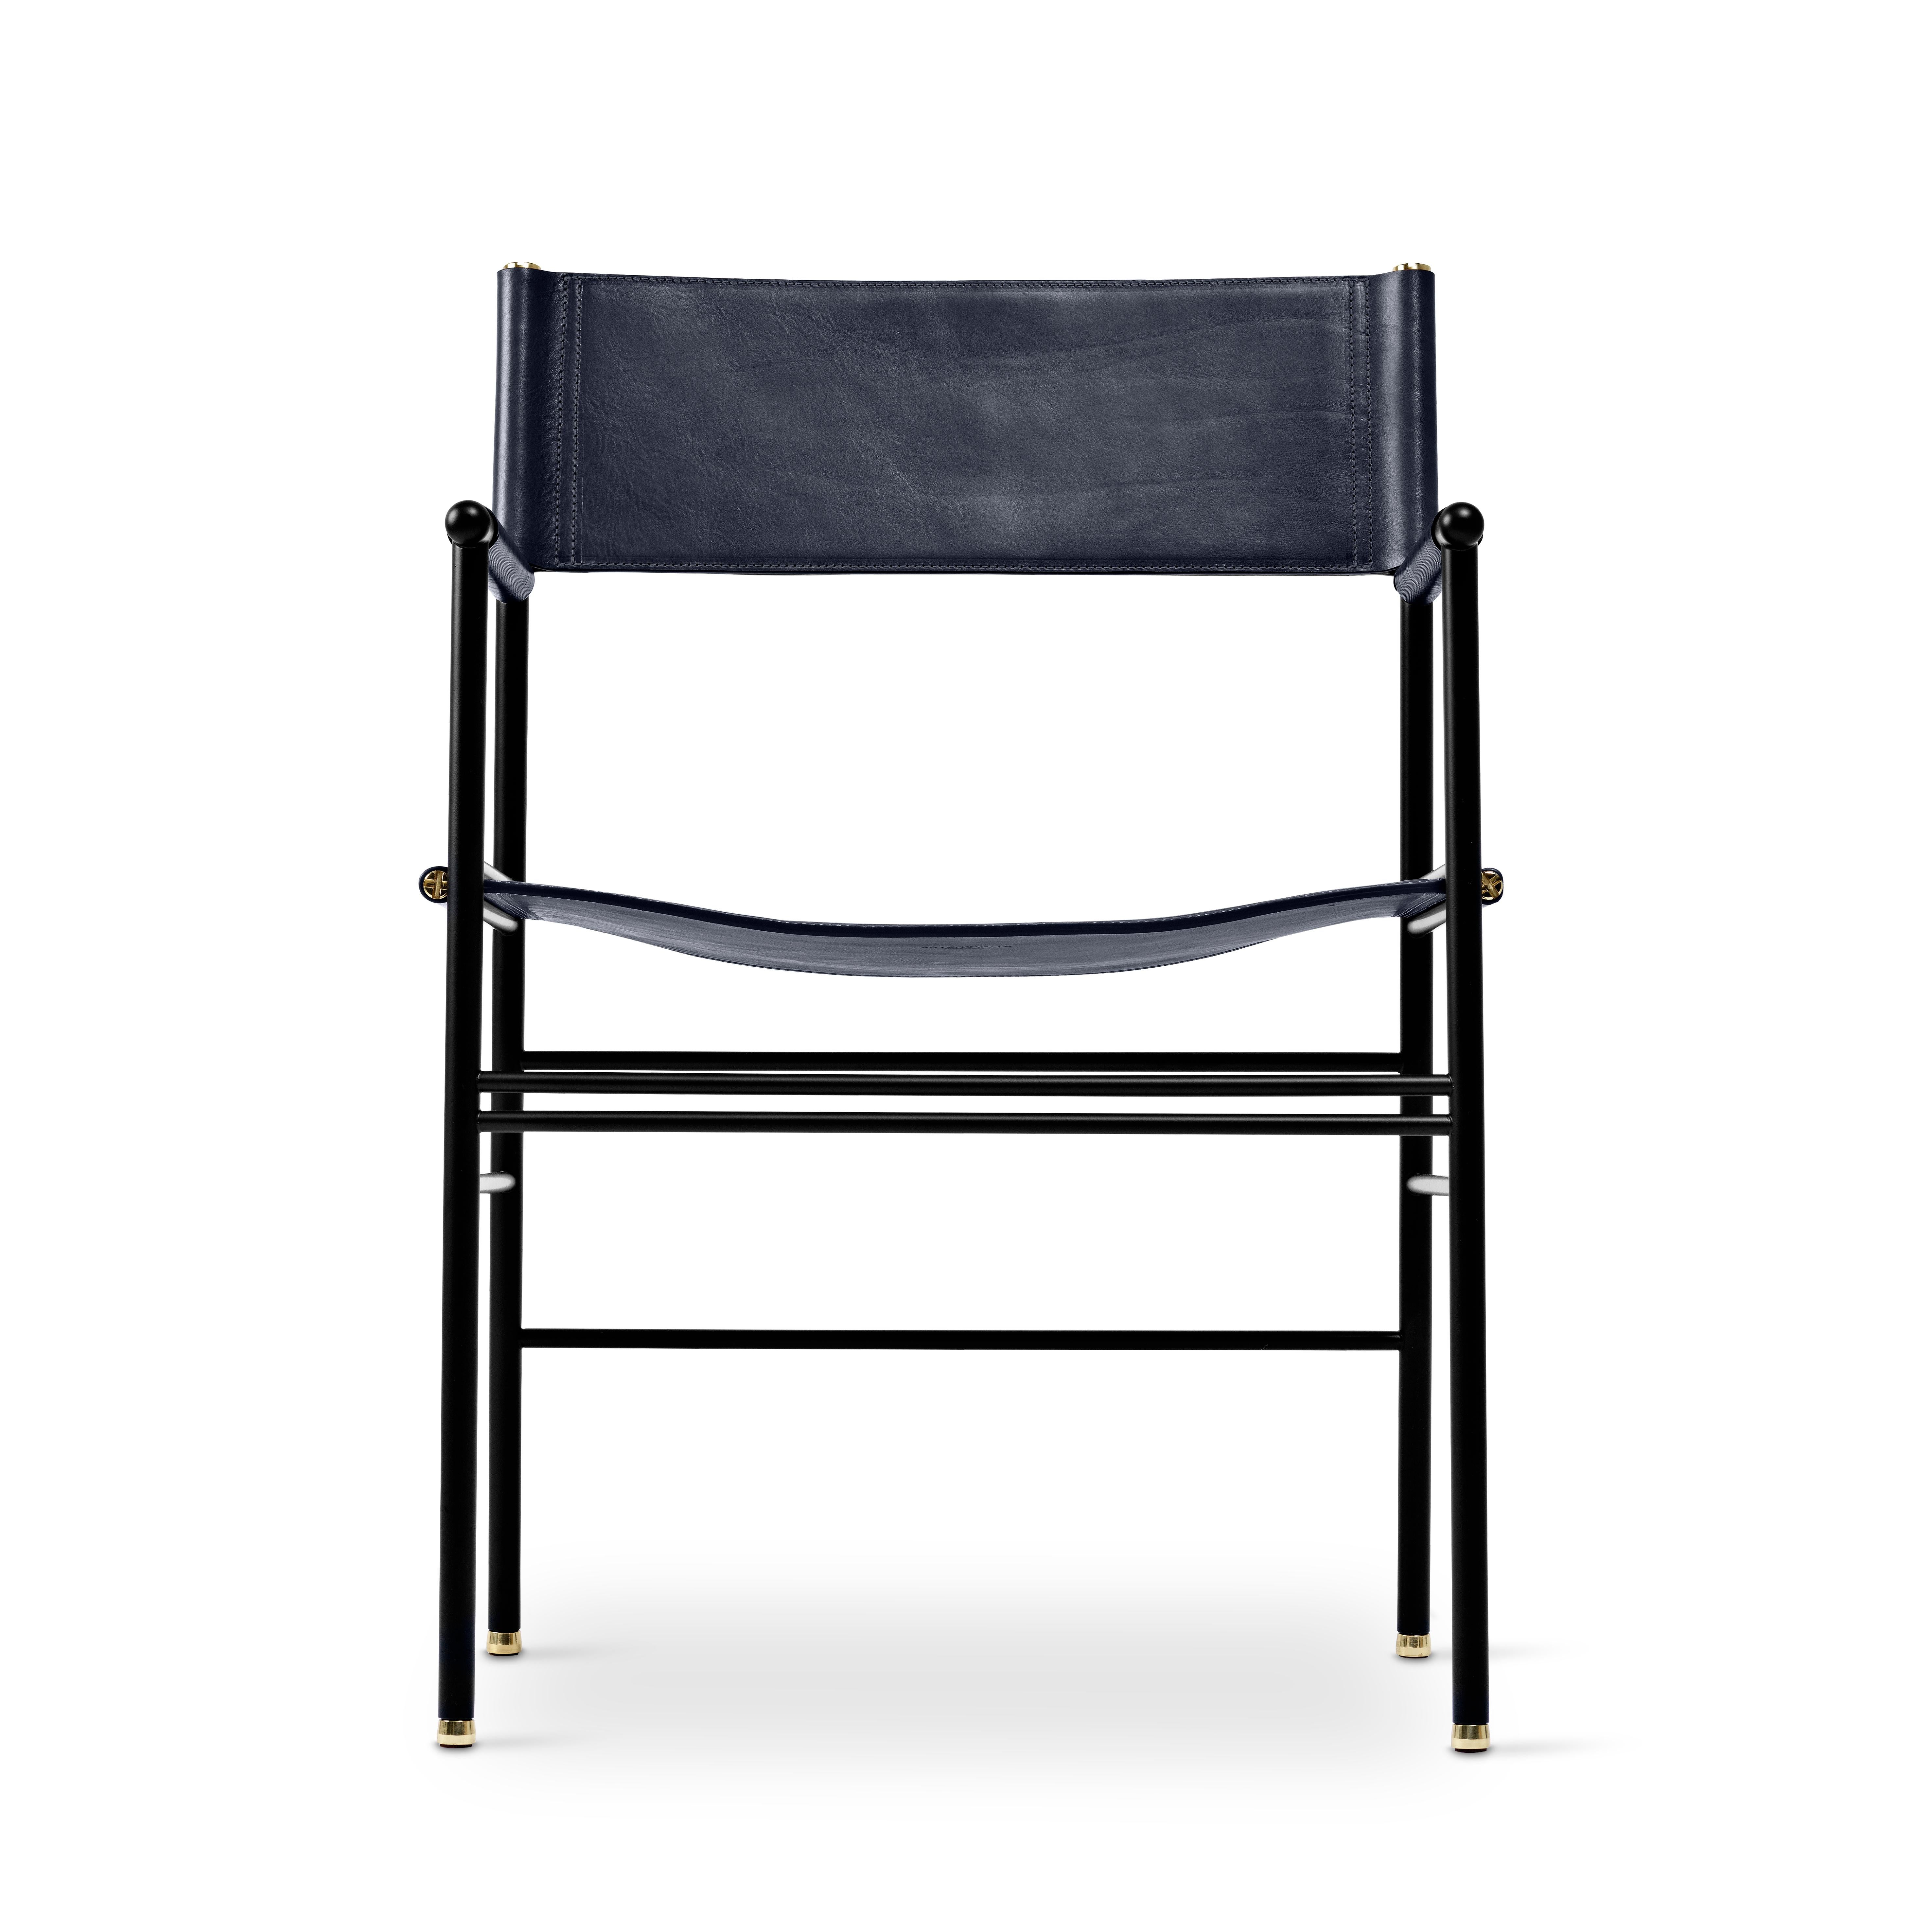 Steel Pair Artisanal Classic Contemporary Chair Navy Blue Leather & Black Rubber Metal For Sale